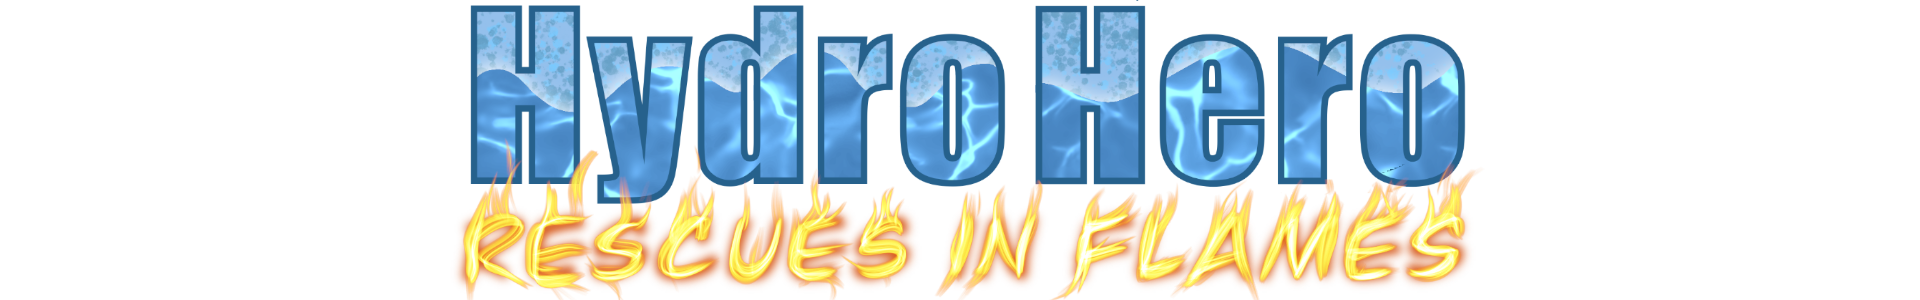 HydroHero: Rescues in Flames